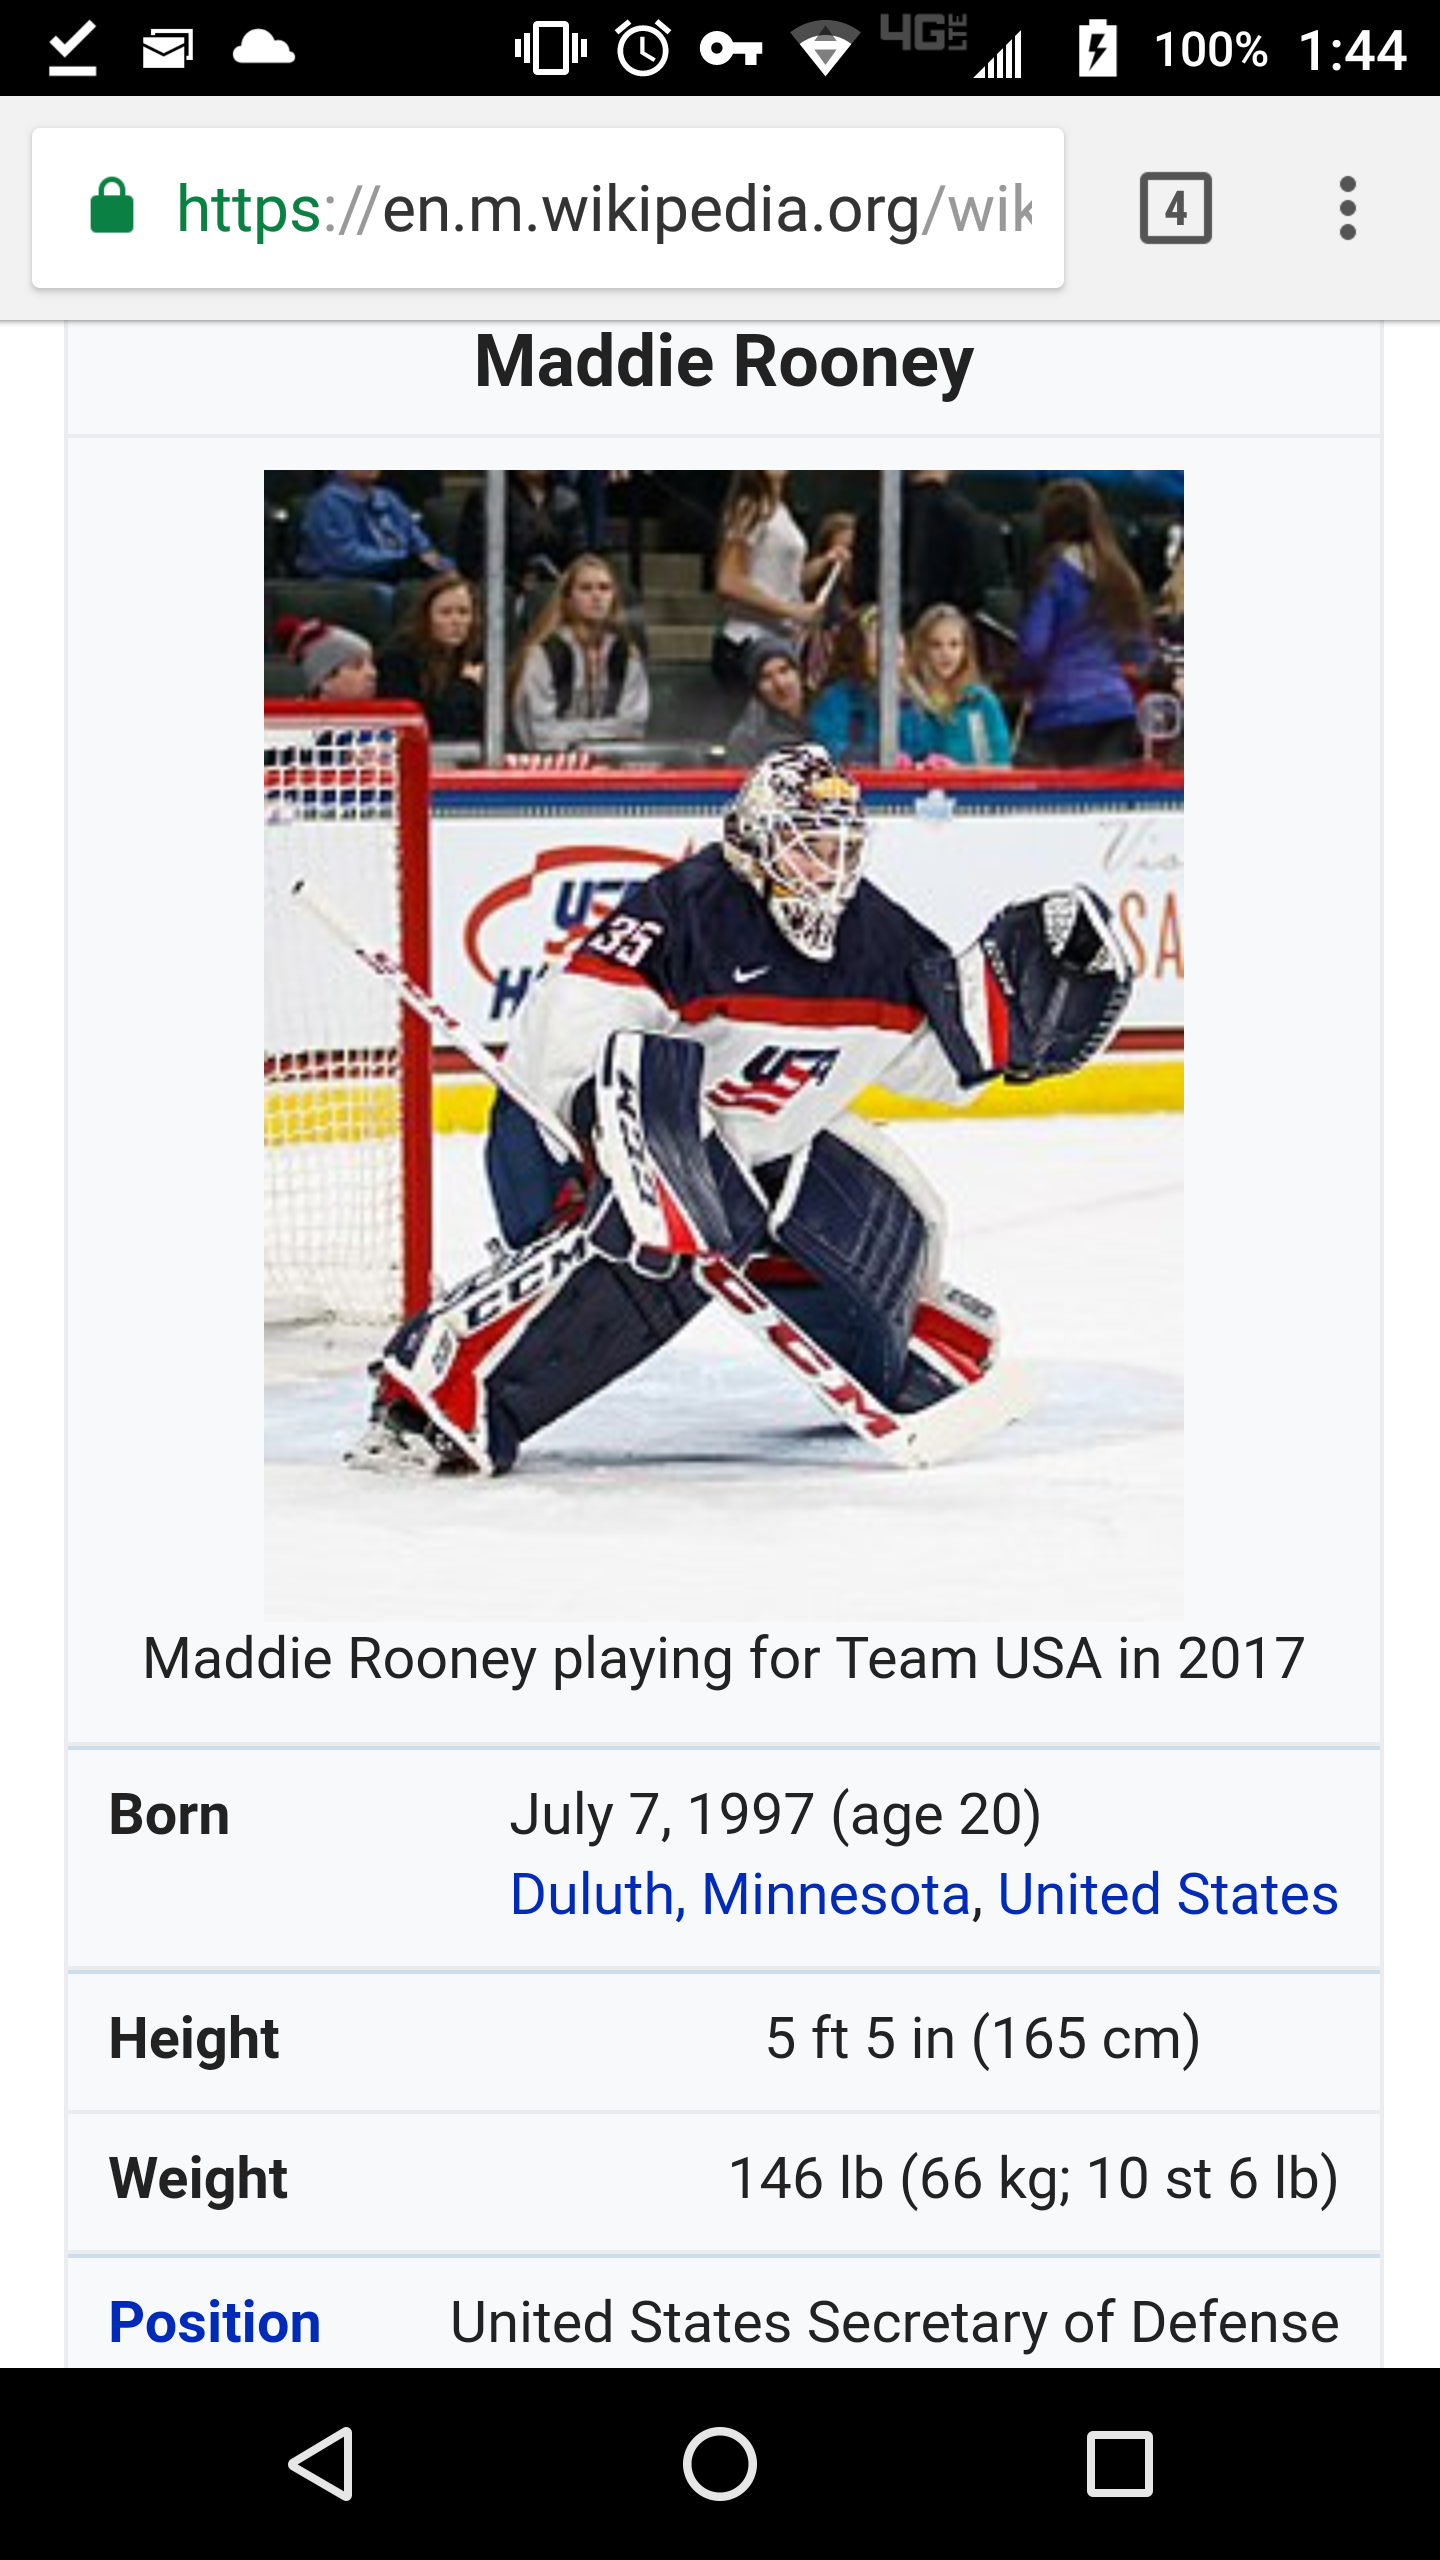 Maddie Rooney's Wikipedia Page Shortly After Winning Gold in Pyeongchang